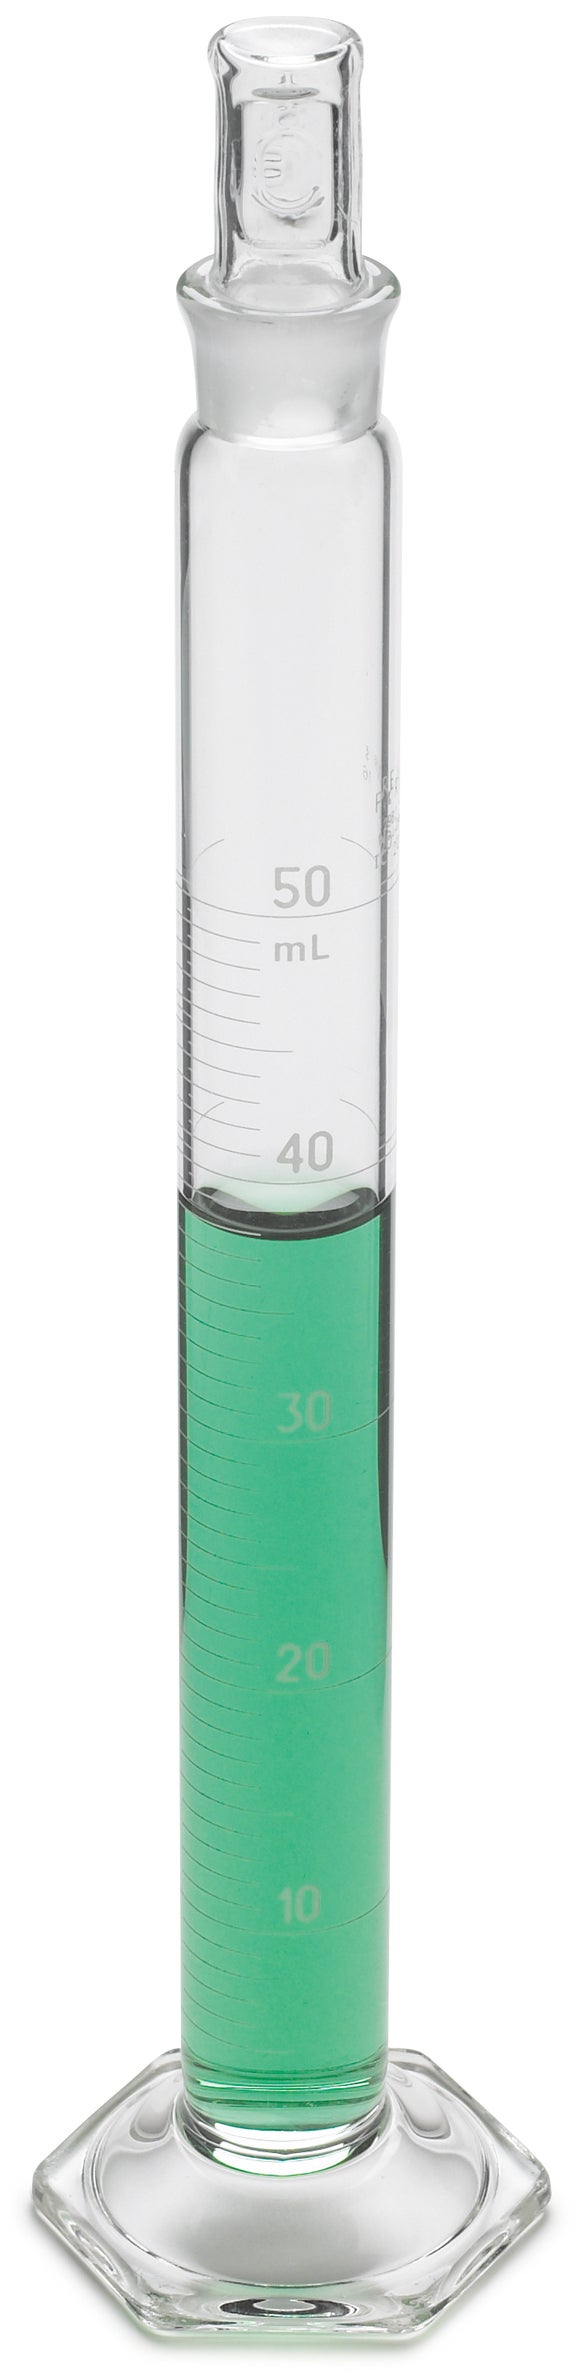 Cylinder, Graduated, Mixing, Glass, 10 mL +-0.1 mL, 0.2 mL divisions, glass stopper #13